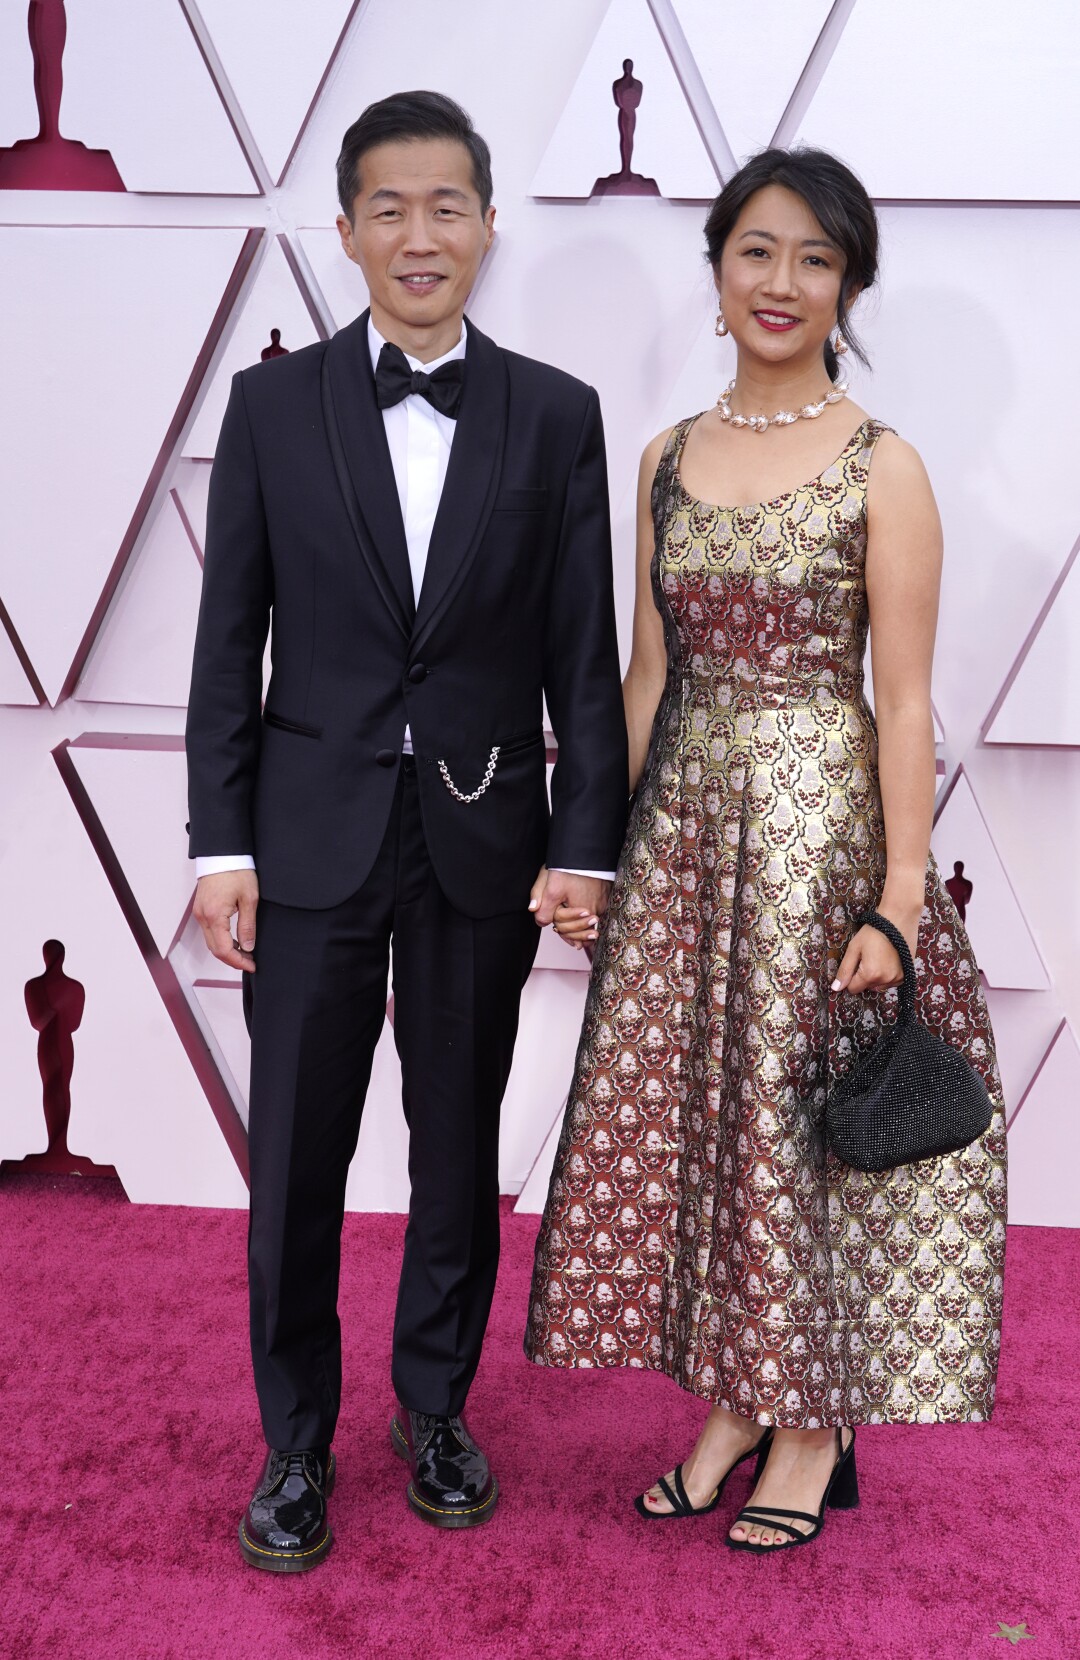 Lee Isaac Chung in a dark suit and Valerie Chung in a metallic ankle-length dress  